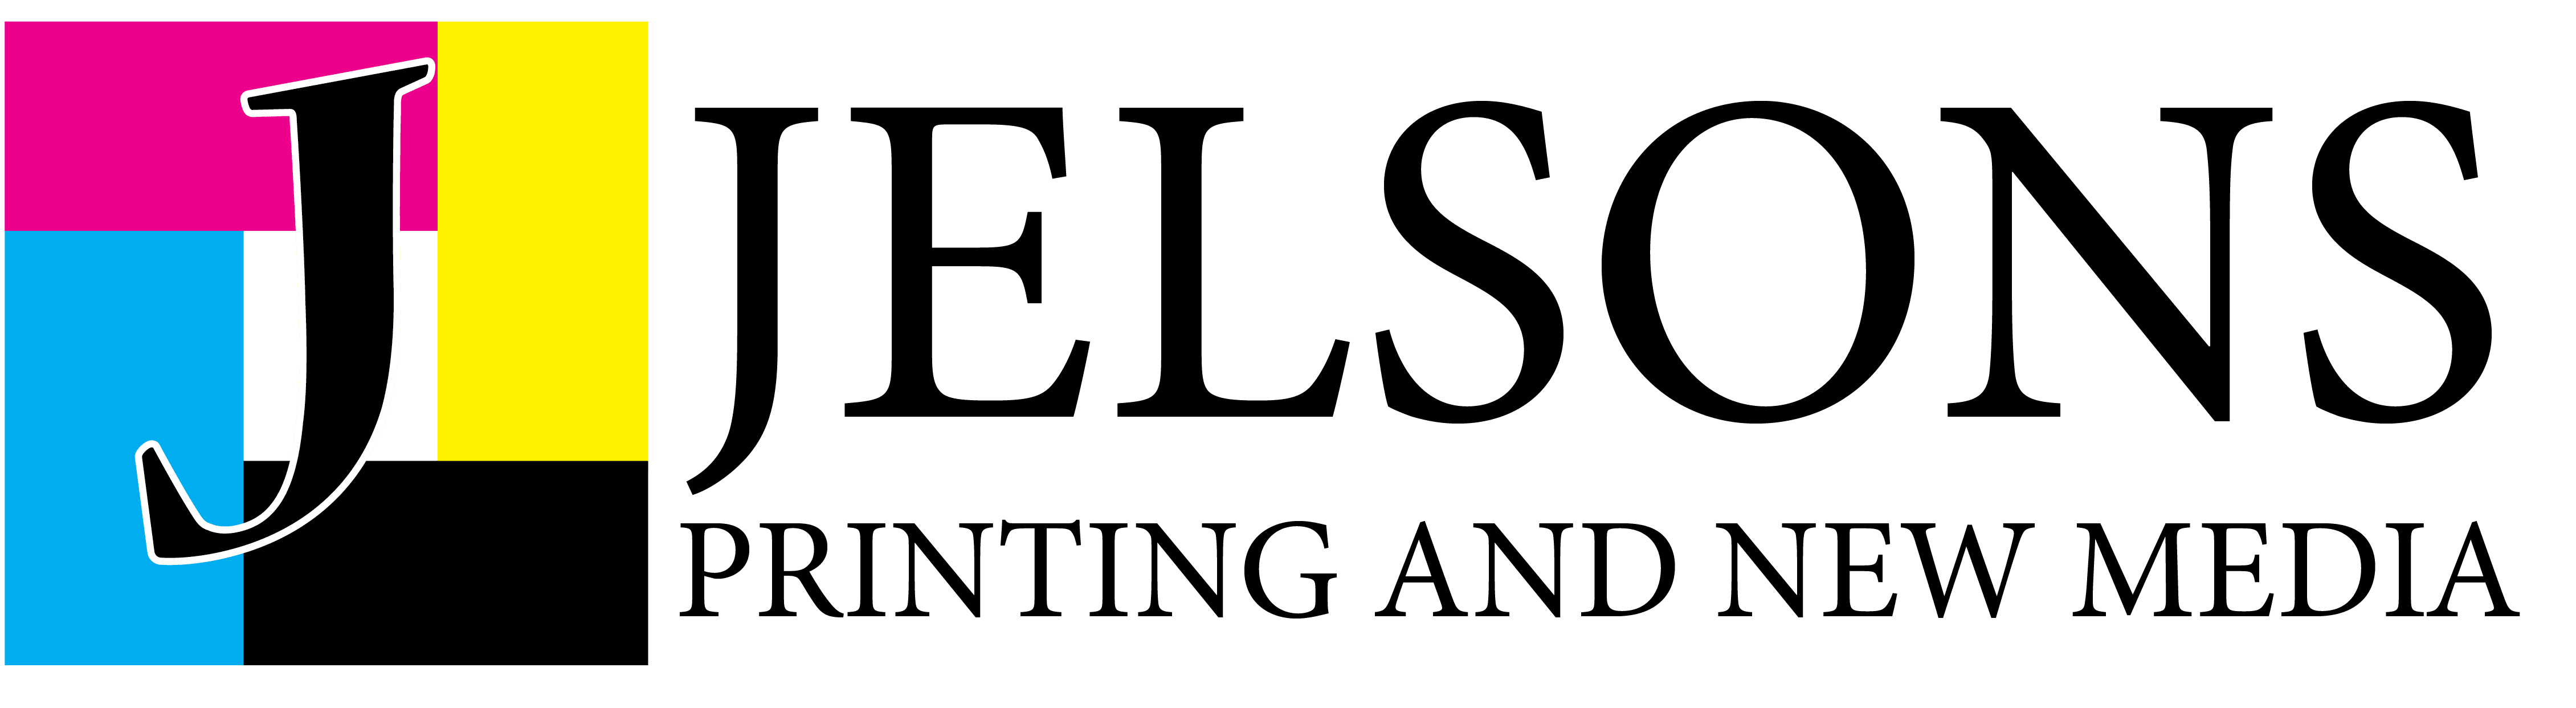 Jelsons Printing and New Media Logo